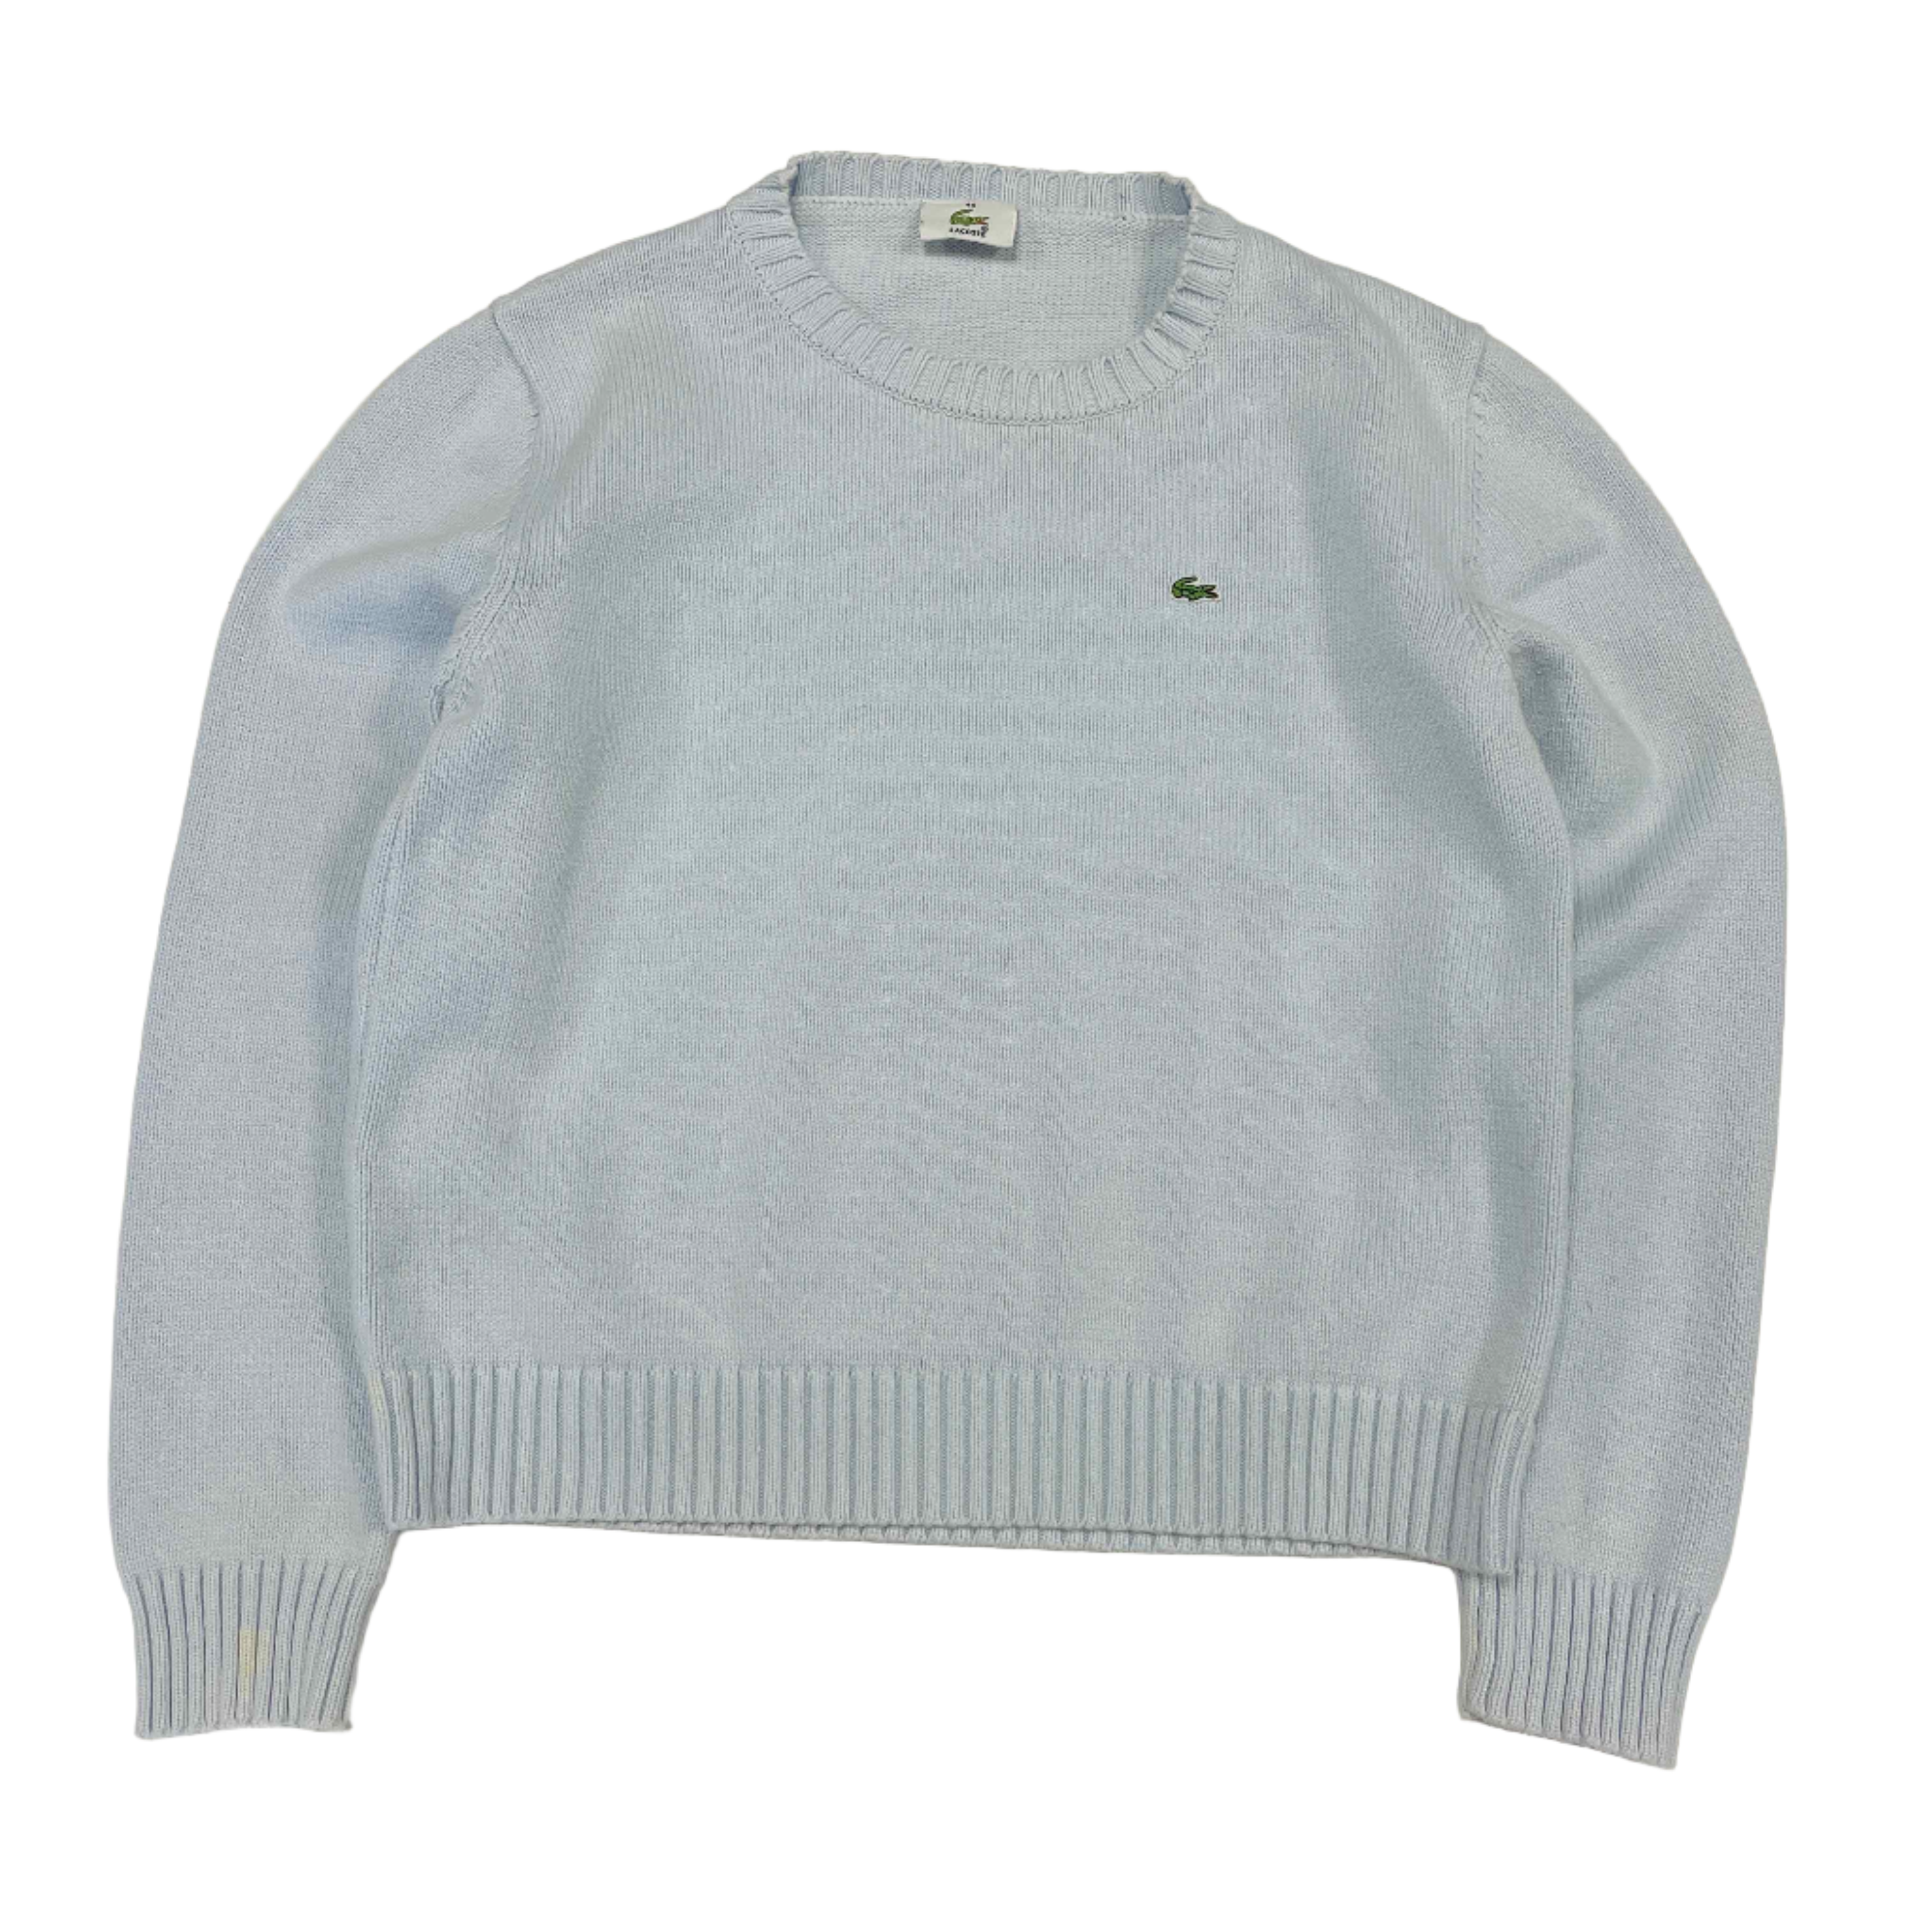 Lacoste Knitted Jumper - Small